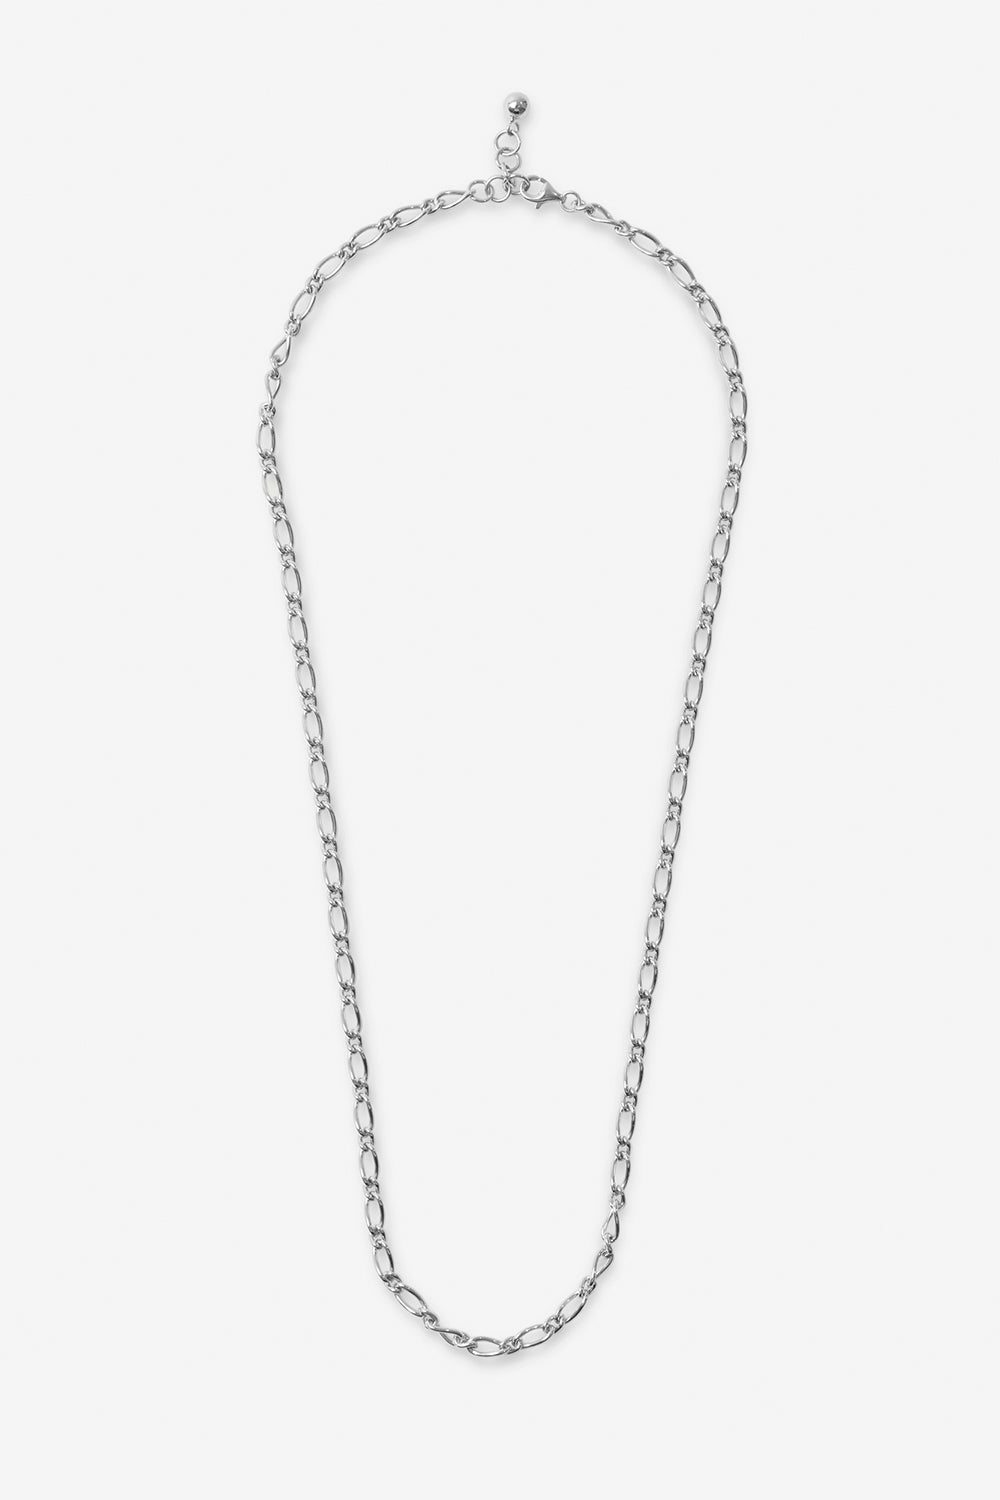 Lynkage Chain Necklace - Sterling Silver